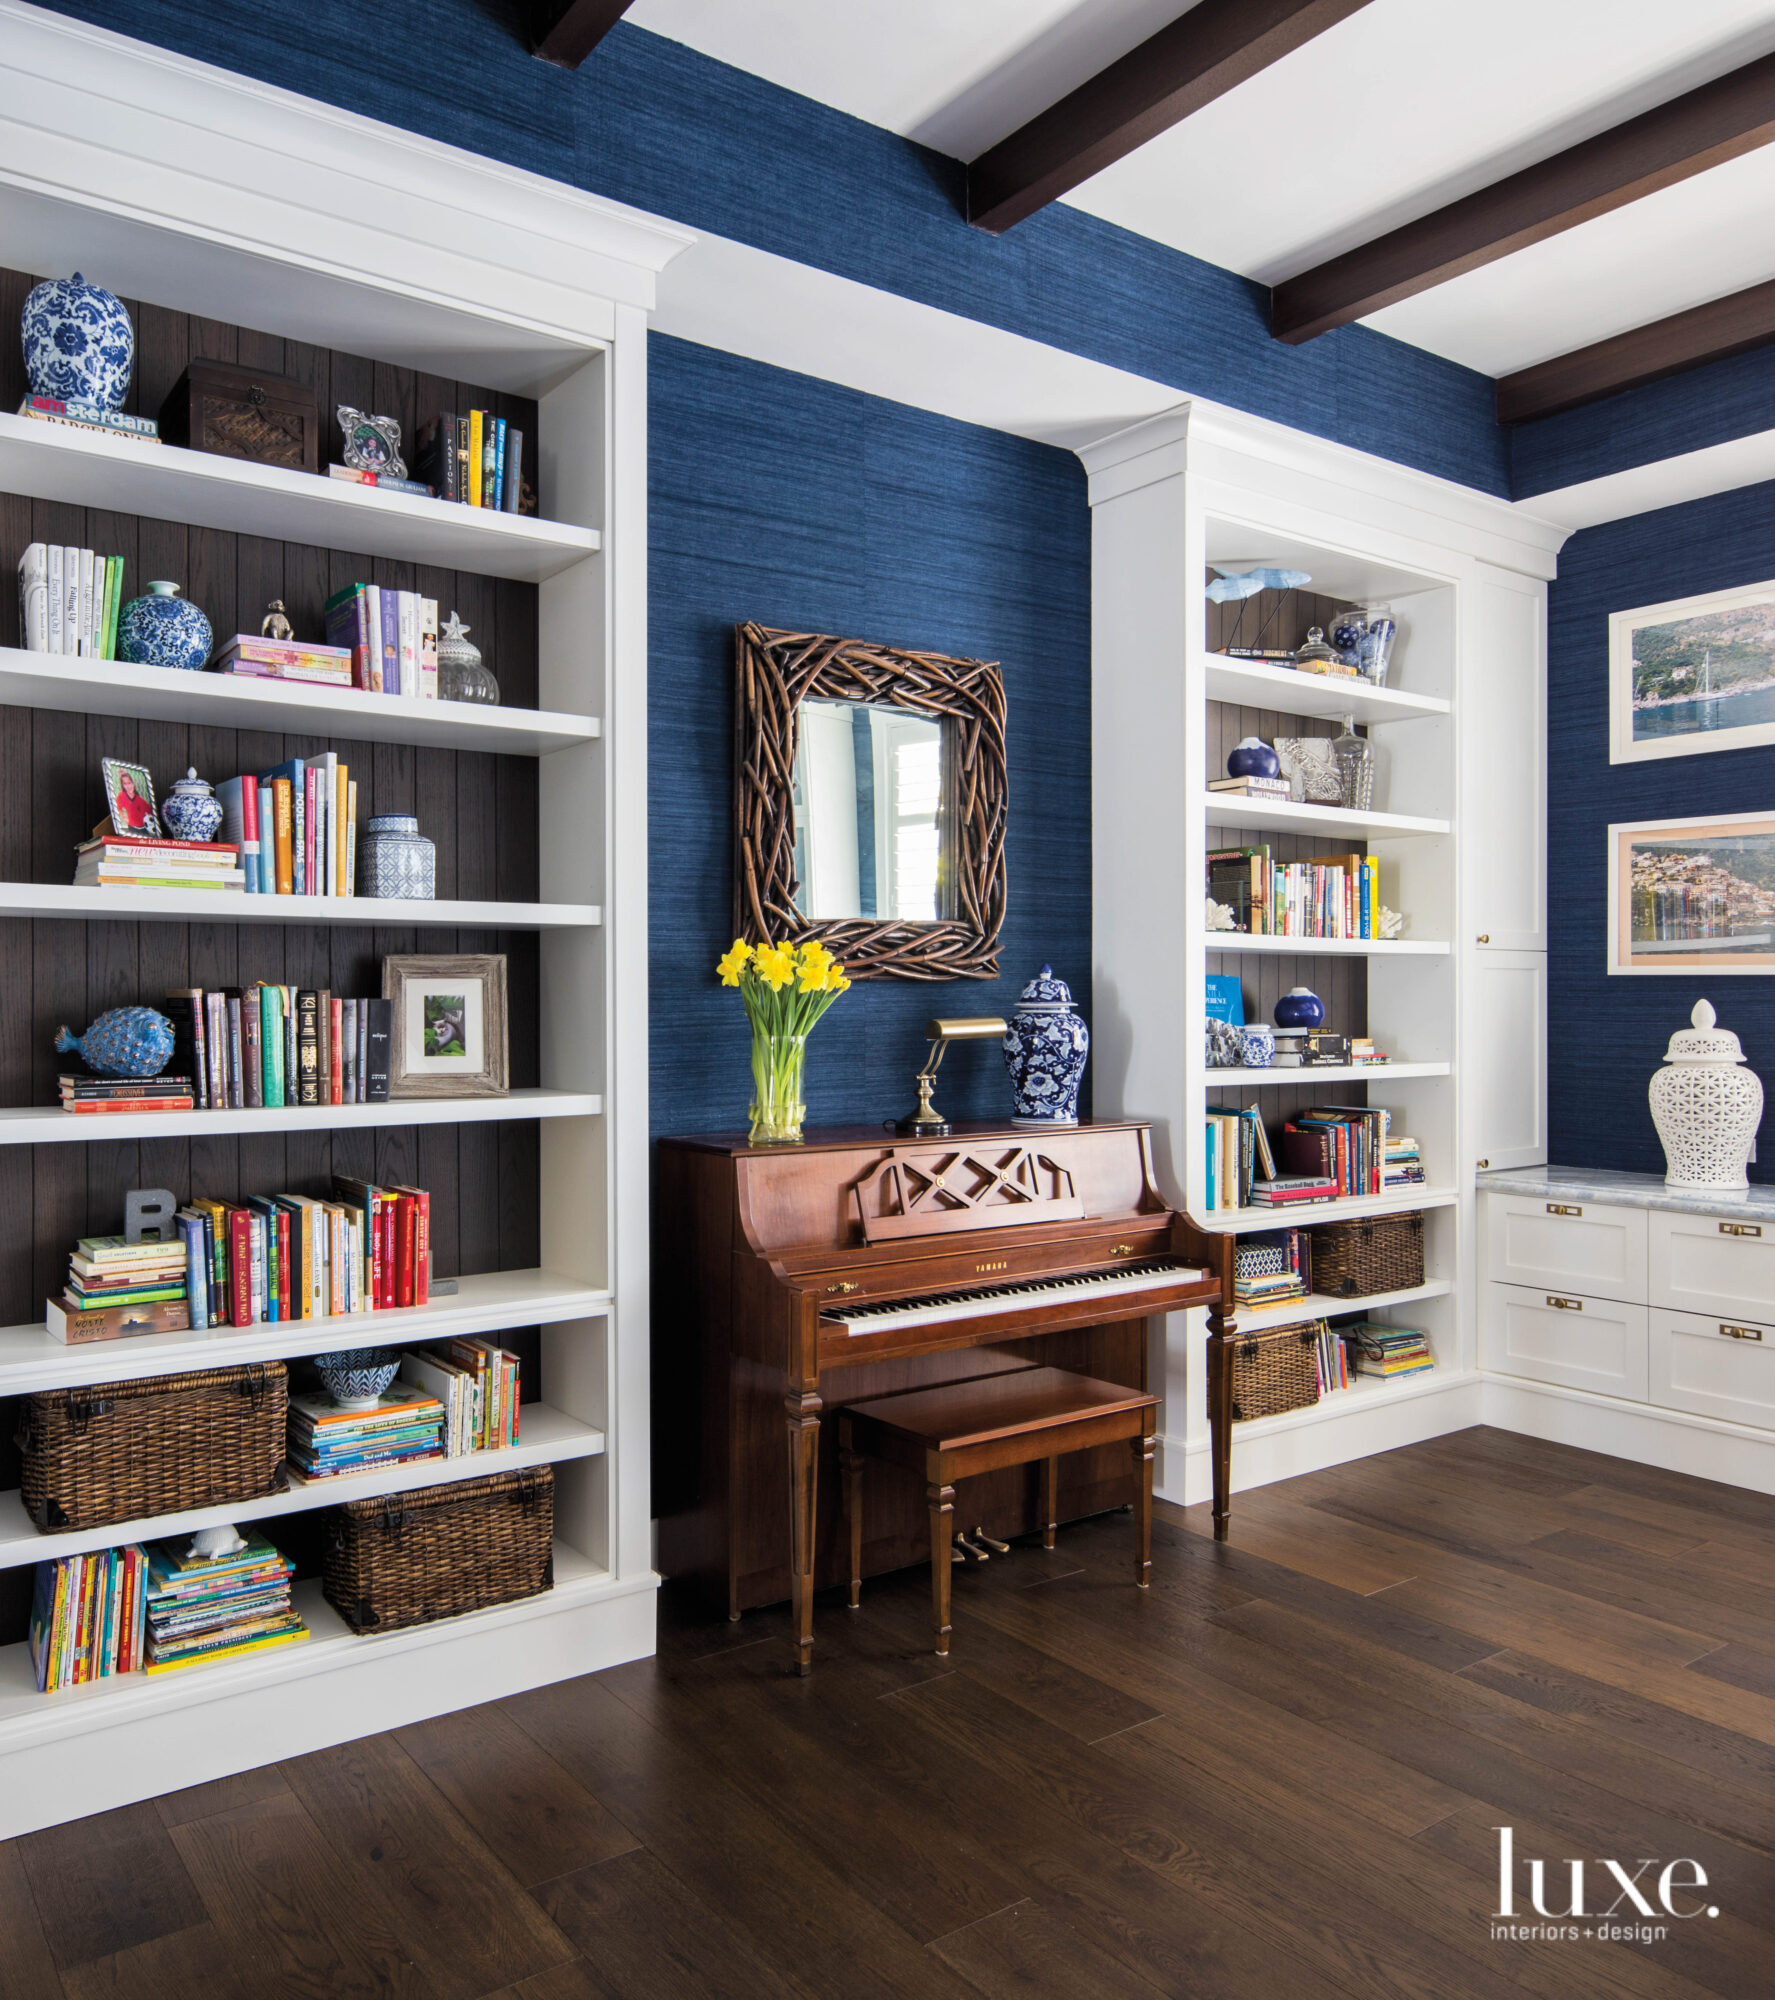 Bar and lounge area with navy walls, piano and white bookshelves